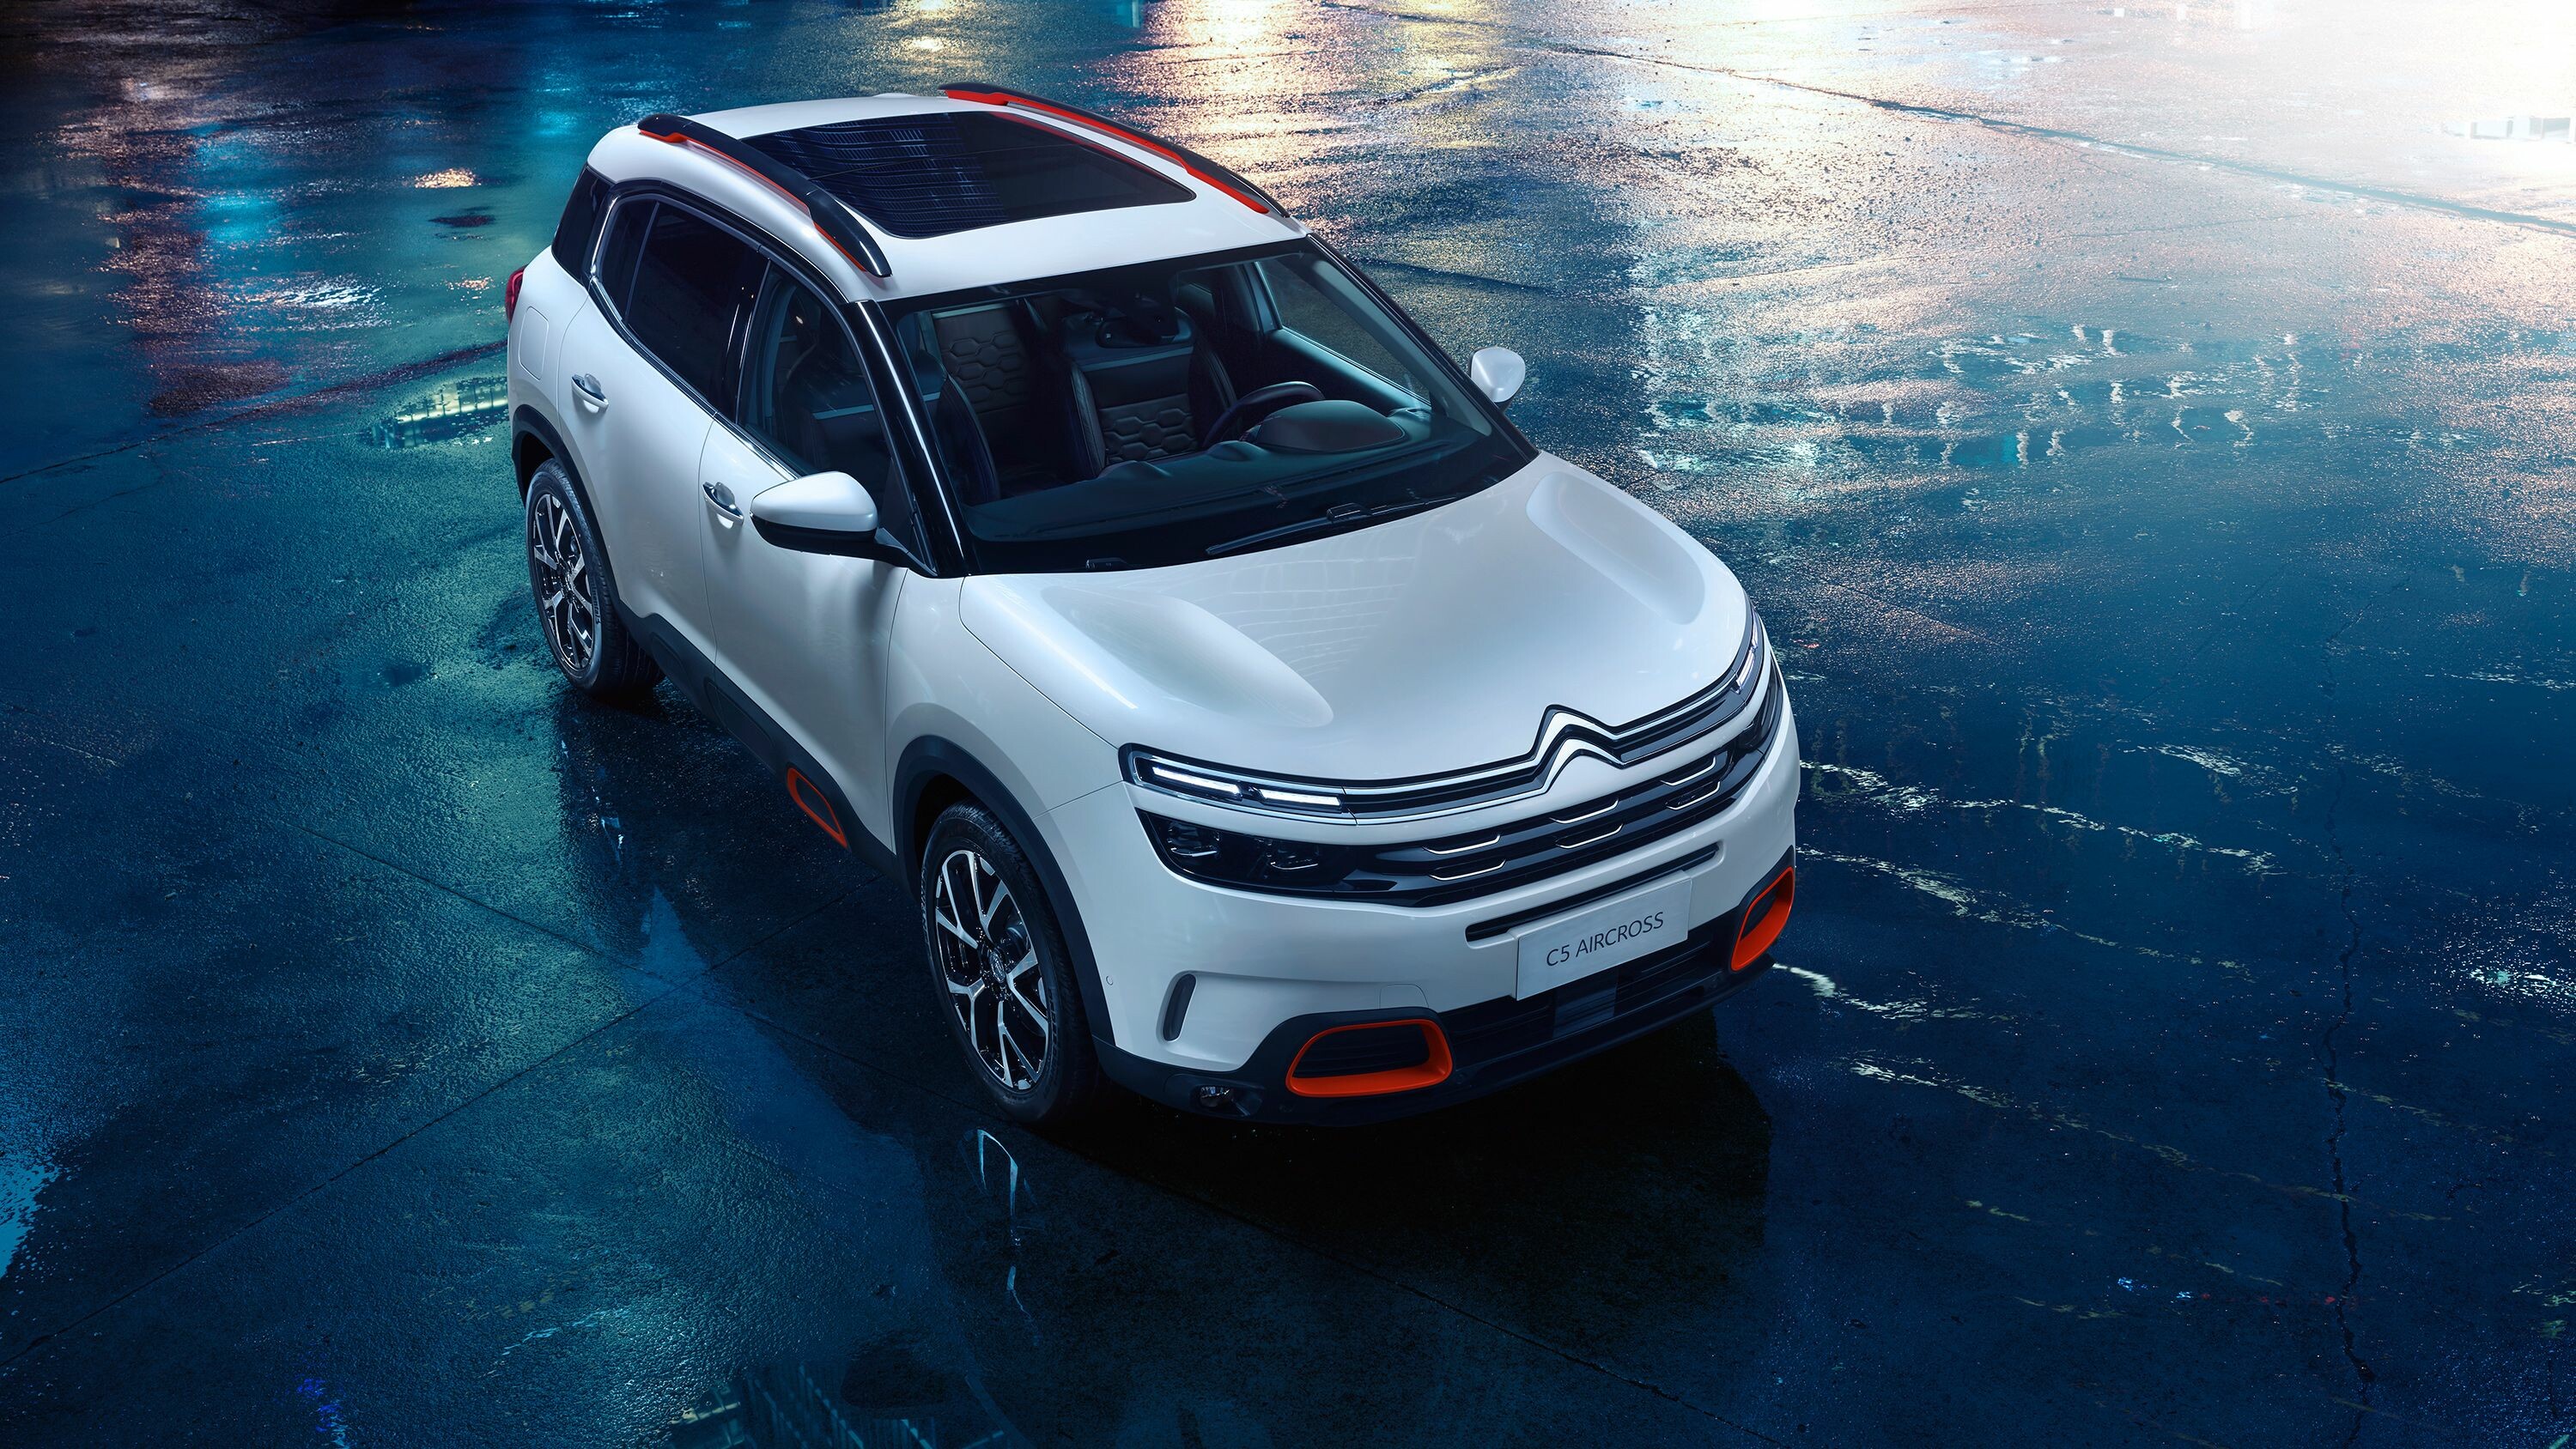 Citroen: Model C5 Aircross, French company, received three European Car of the Year awards. 3000x1690 HD Wallpaper.